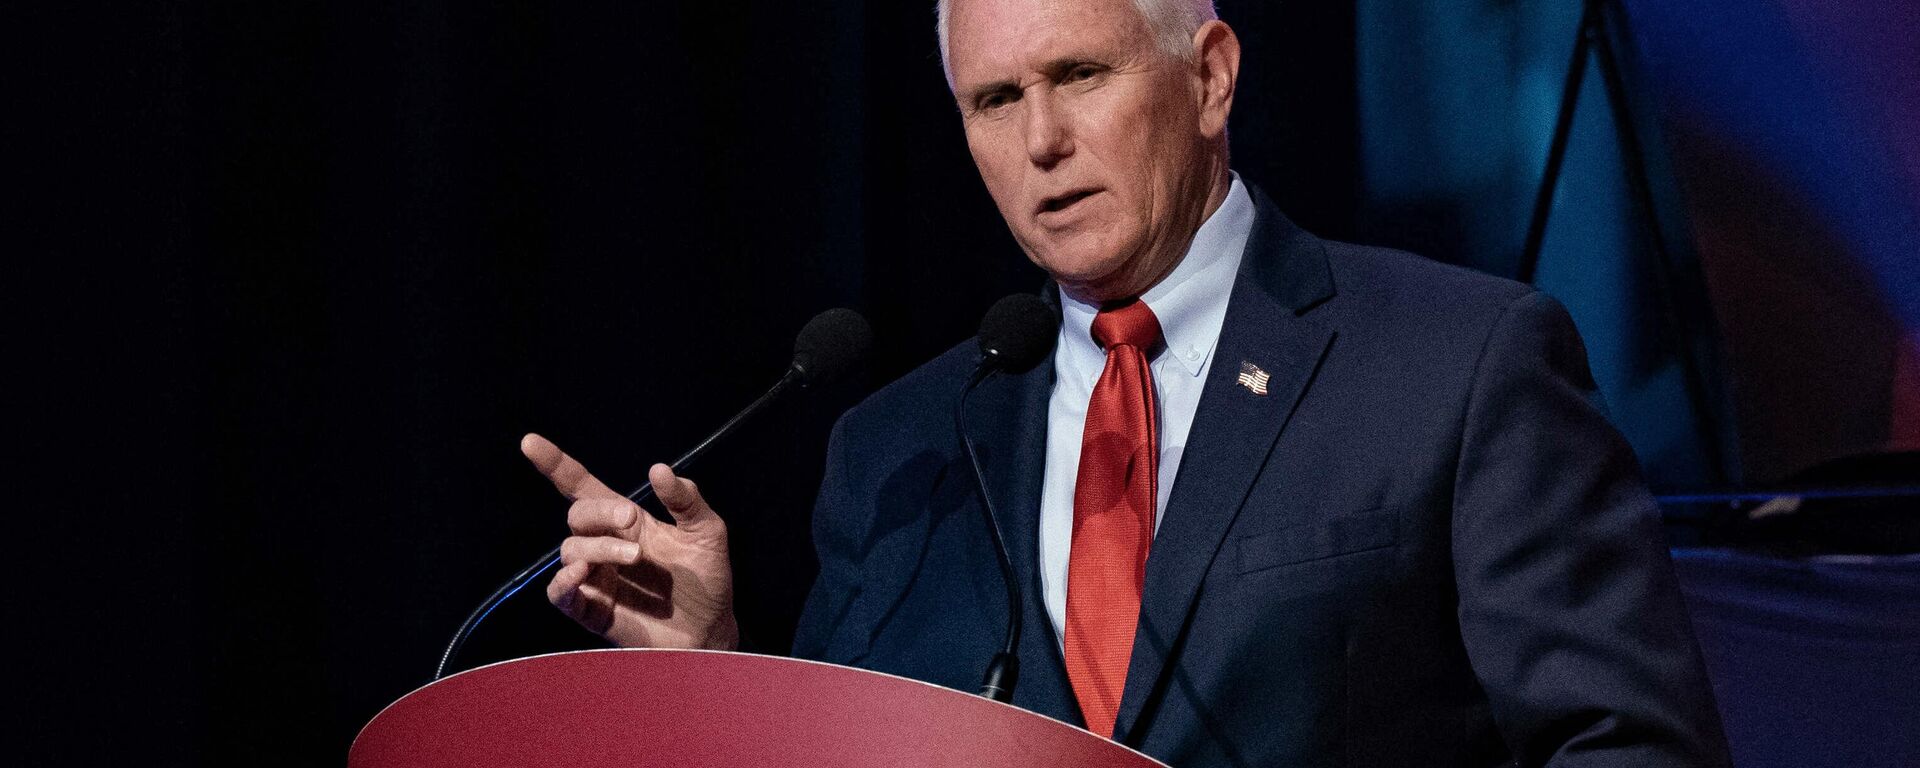 Former US Vice President Mike Pence speaks about Saving America from the Woke Left, at the University of North Carolina Chapel Hill in Chapel Hill, North Carolina, on April 26, 2023 - Sputnik International, 1920, 19.06.2023